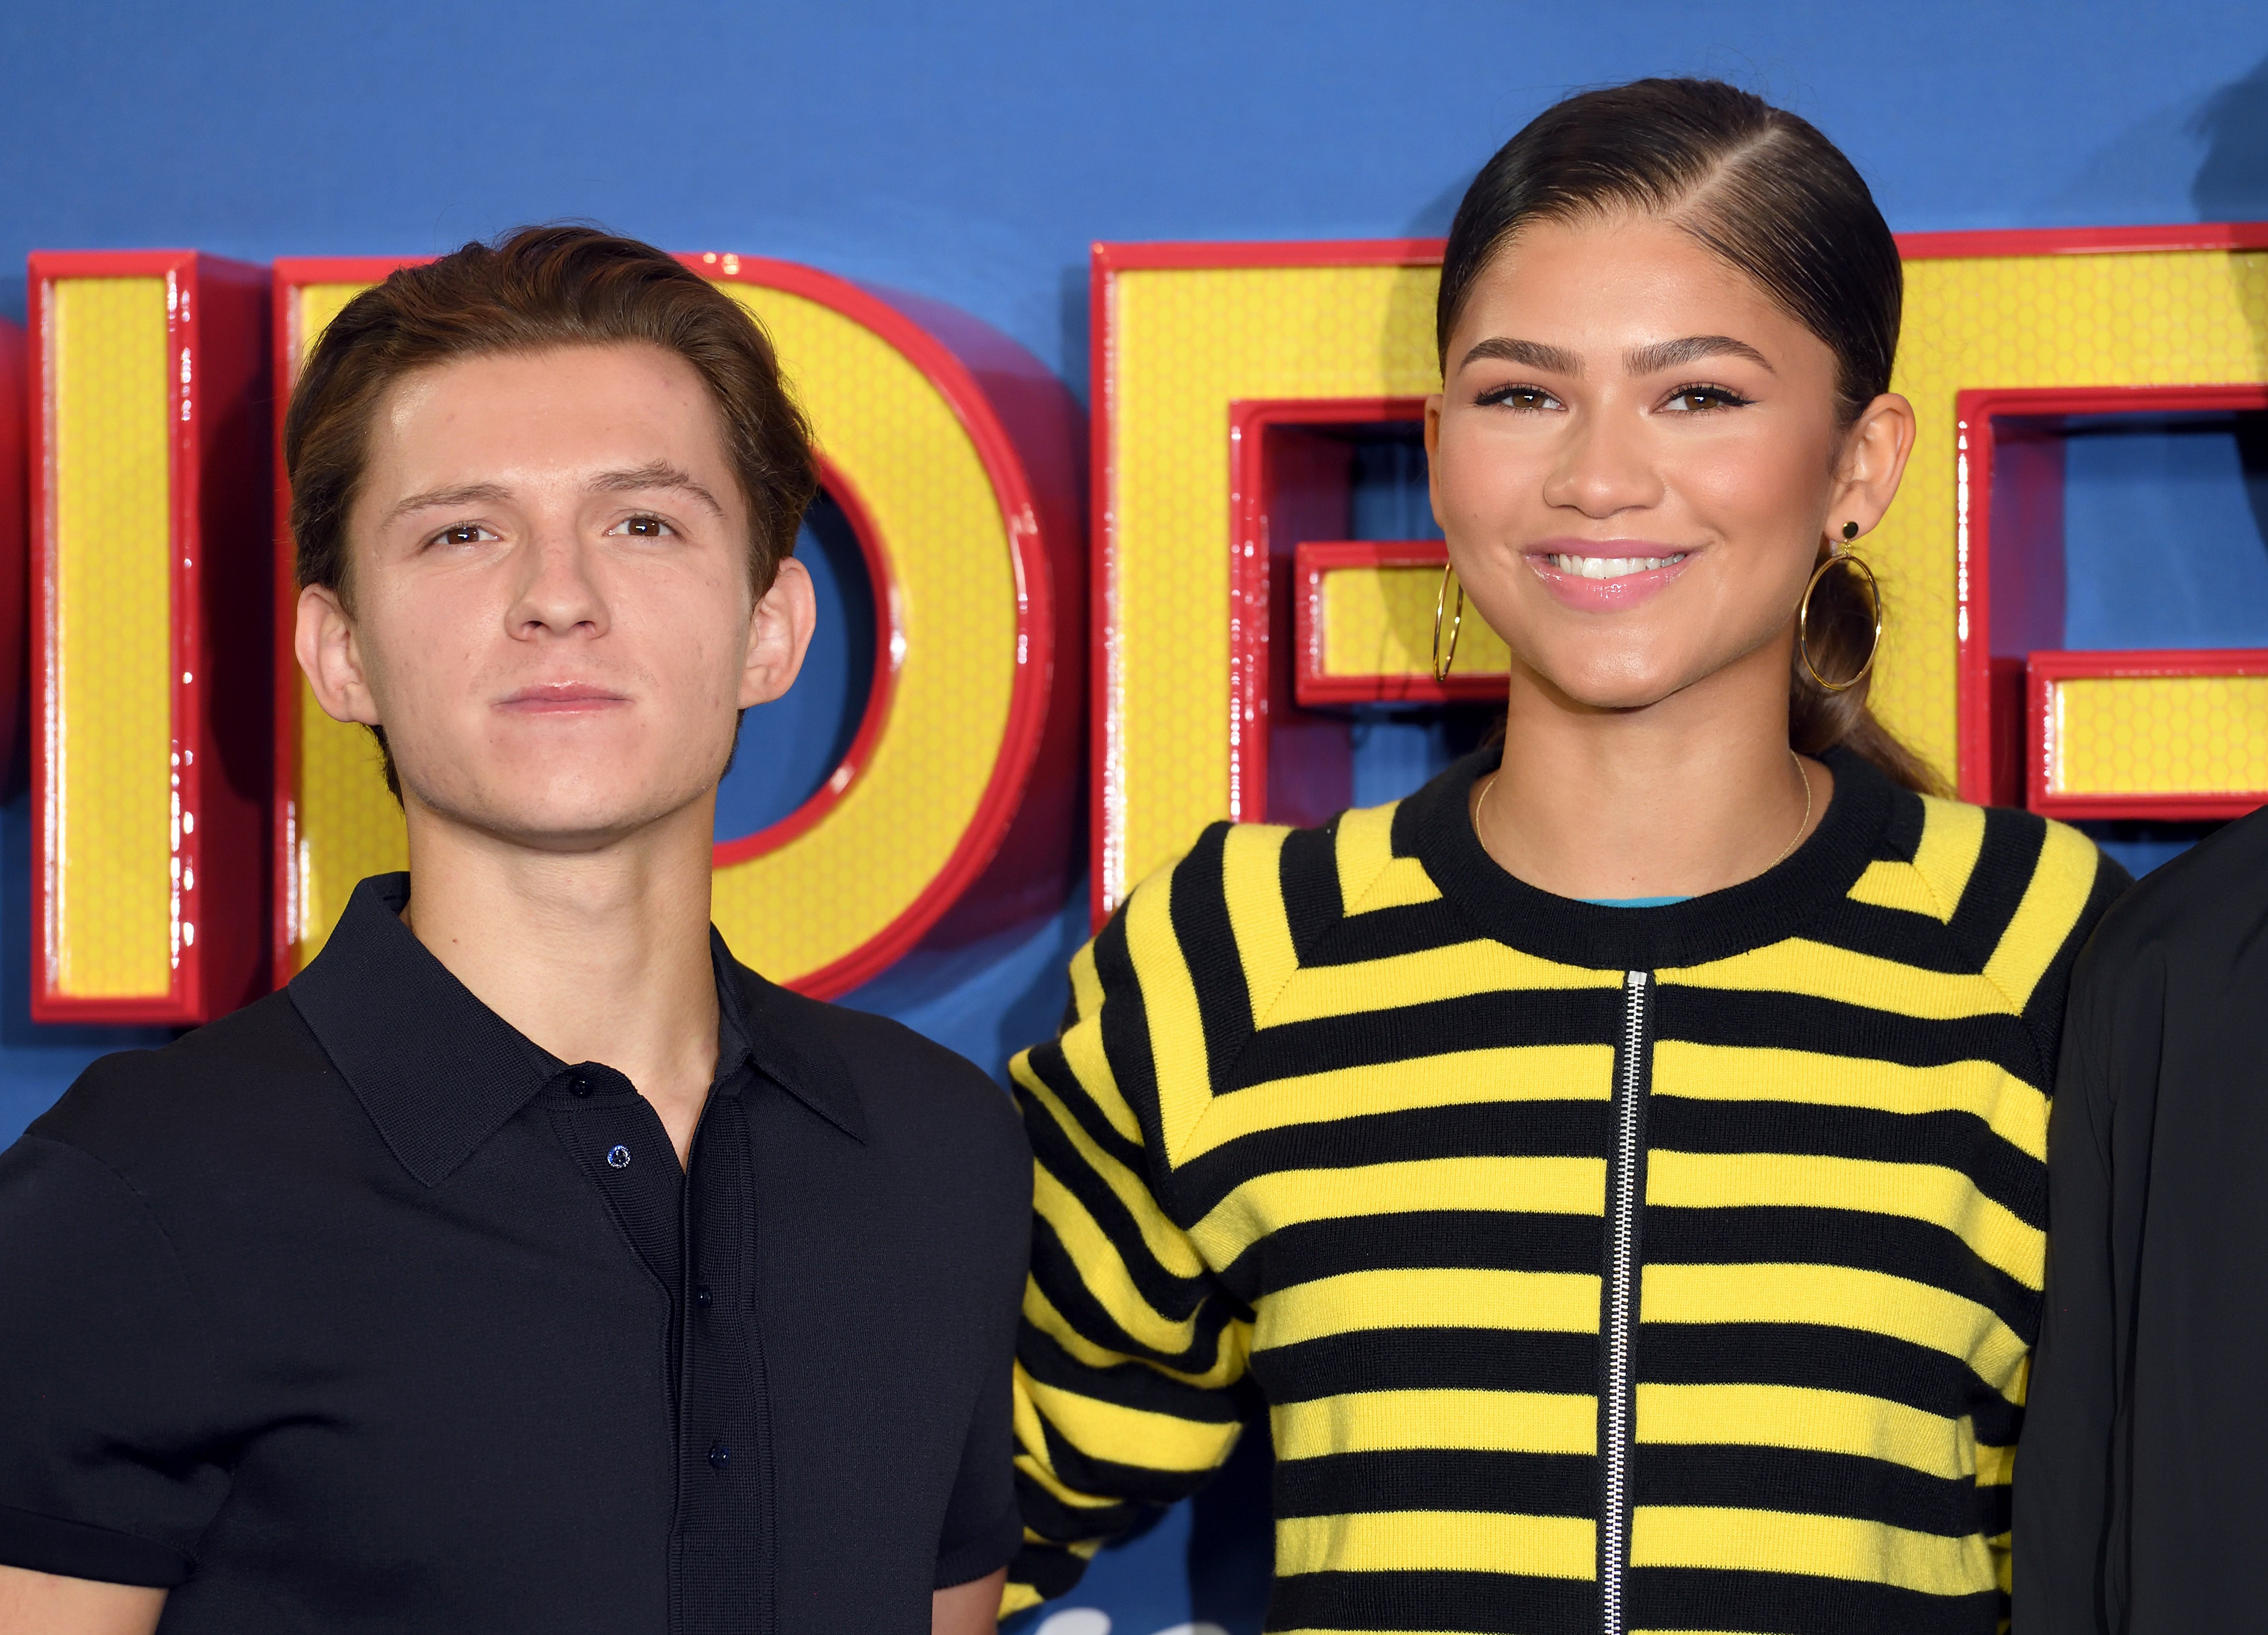 Nice Try Internet, Zendaya And 'Spider-Man: Homecoming' Co-Star Deny They're Dating